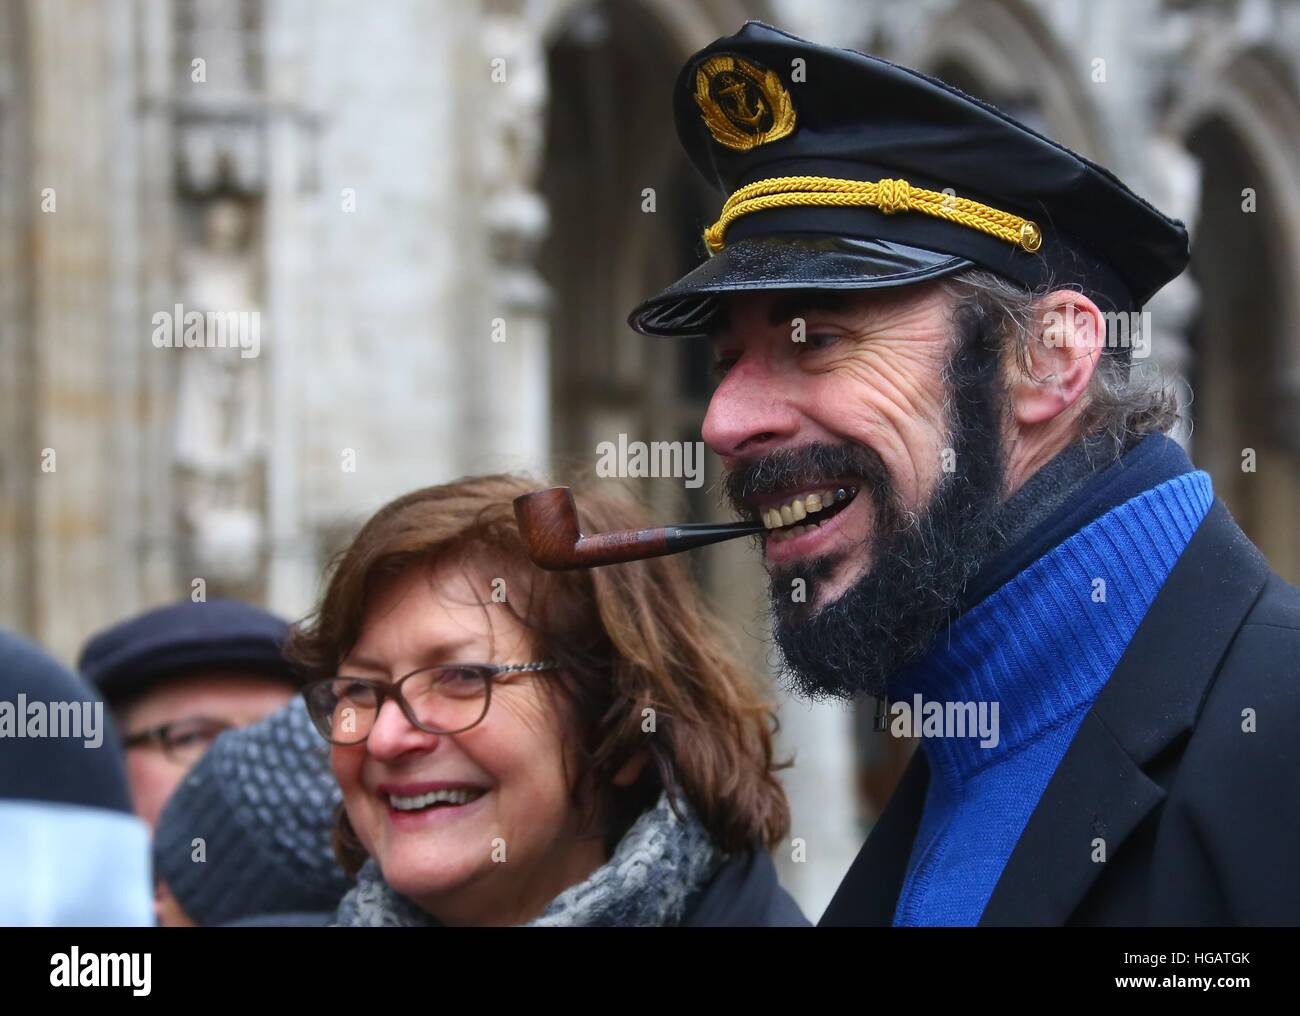 Brussels, Belgium. 7th Jan, 2017. A man cosplayed as Captain Archibald Haddock, a character of 'The Adventures of Tintin', attends the show in the Grand Place of Brussels, Belgium, Jan. 7, 2017. A comic character show of 'The Adventures of Tintin' was held in Brussels on Saturday. 'The Adventures of Tintin' comics tell stories of a young Belgian reporter and explorer. They have been translated into dozens of languages and adapted for radio, television, theater and film. © Gong Bing/Xinhua/Alamy Live News Stock Photo